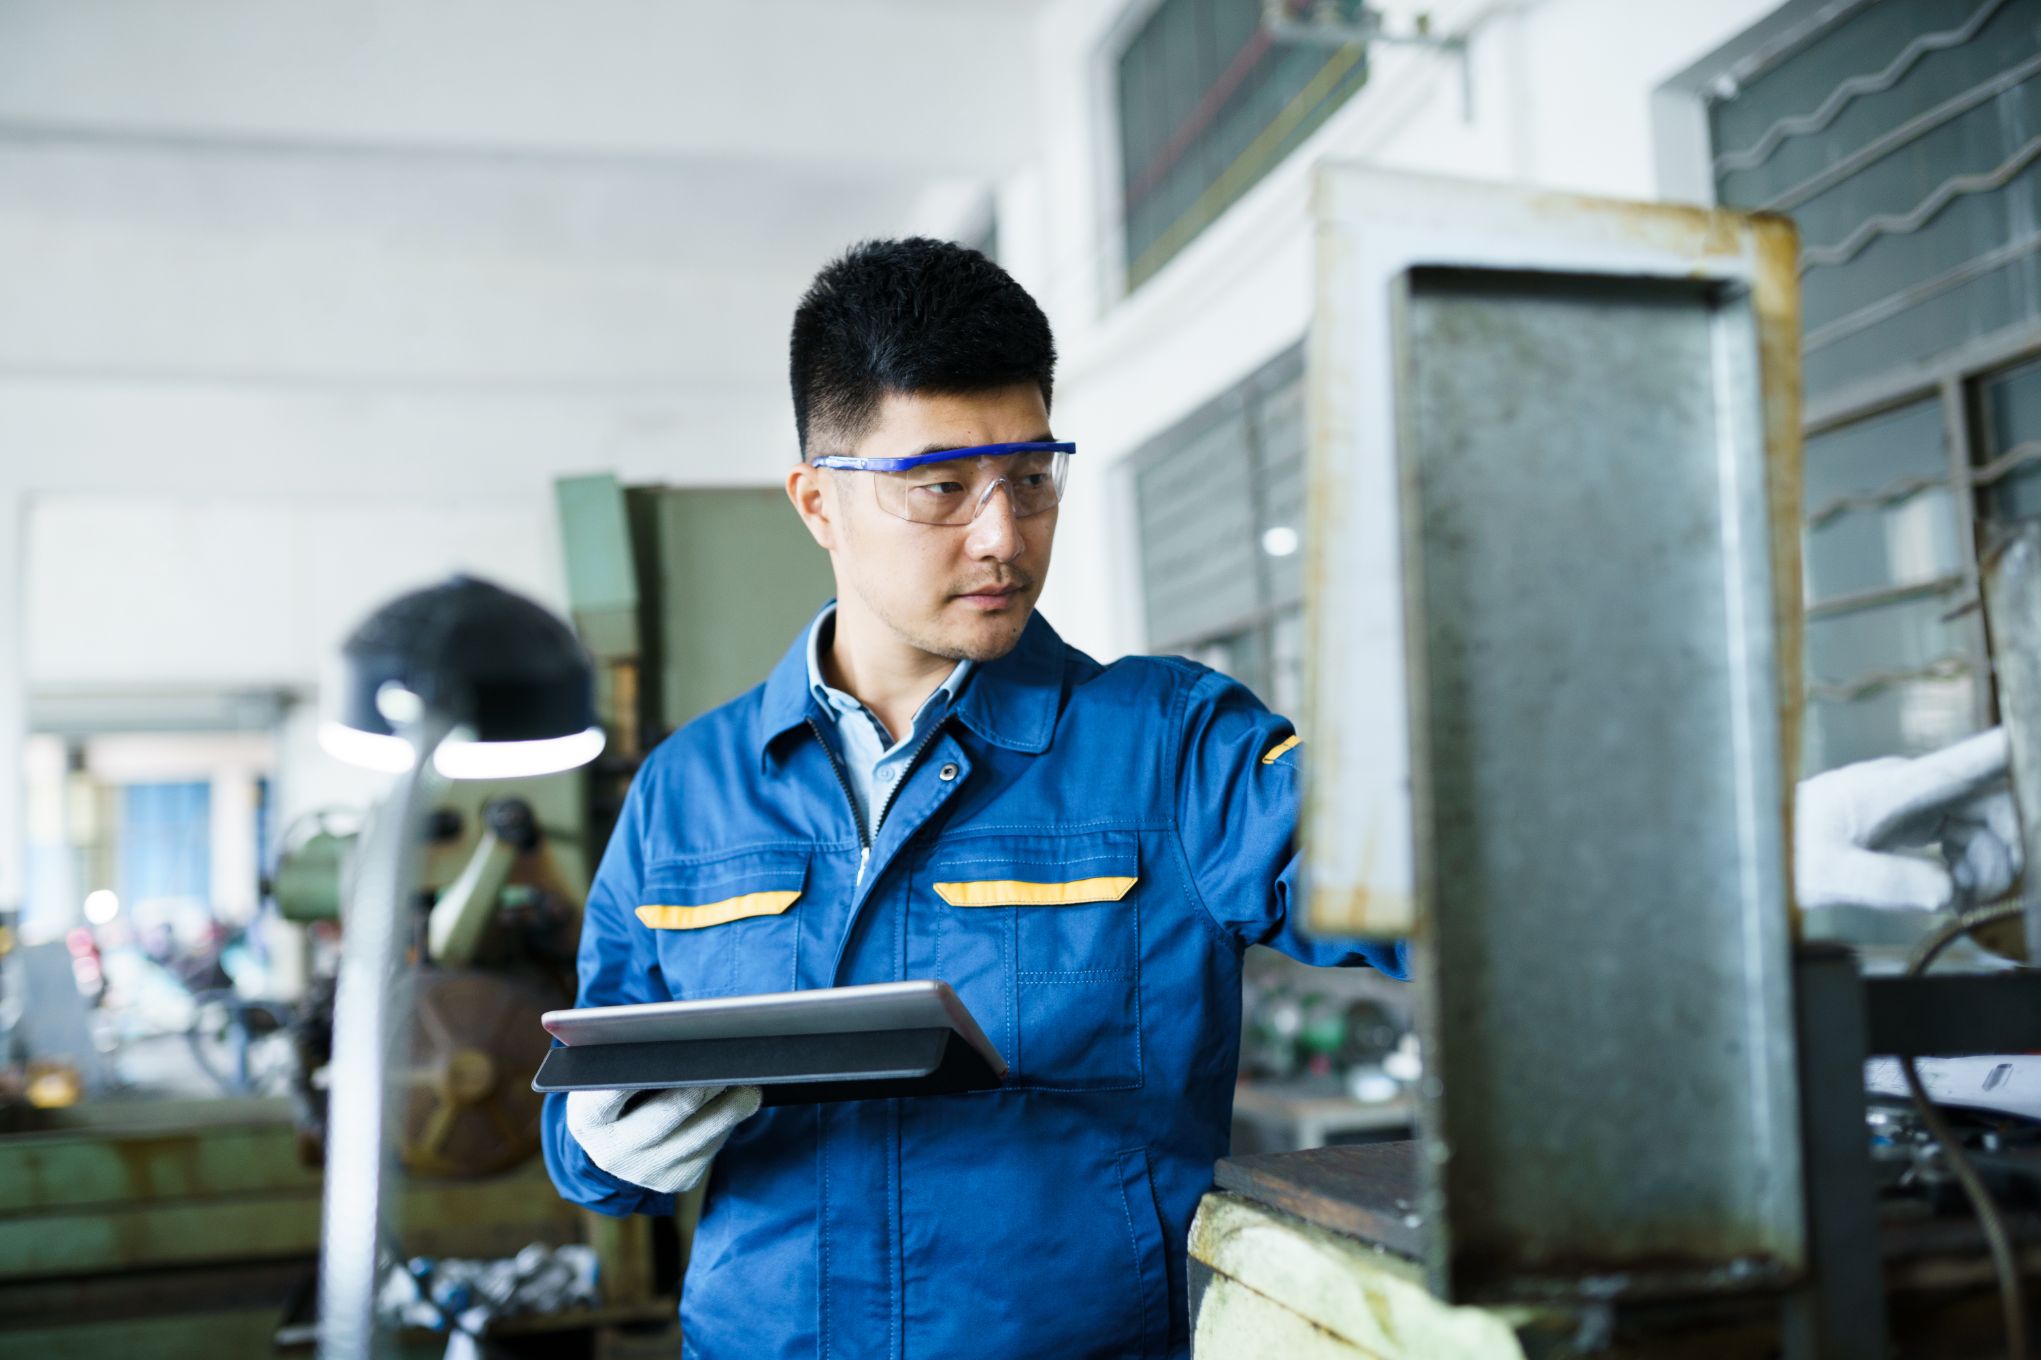 Image of a person wearing a uniform and safety goggles, working on a machine, and holding a tablet.